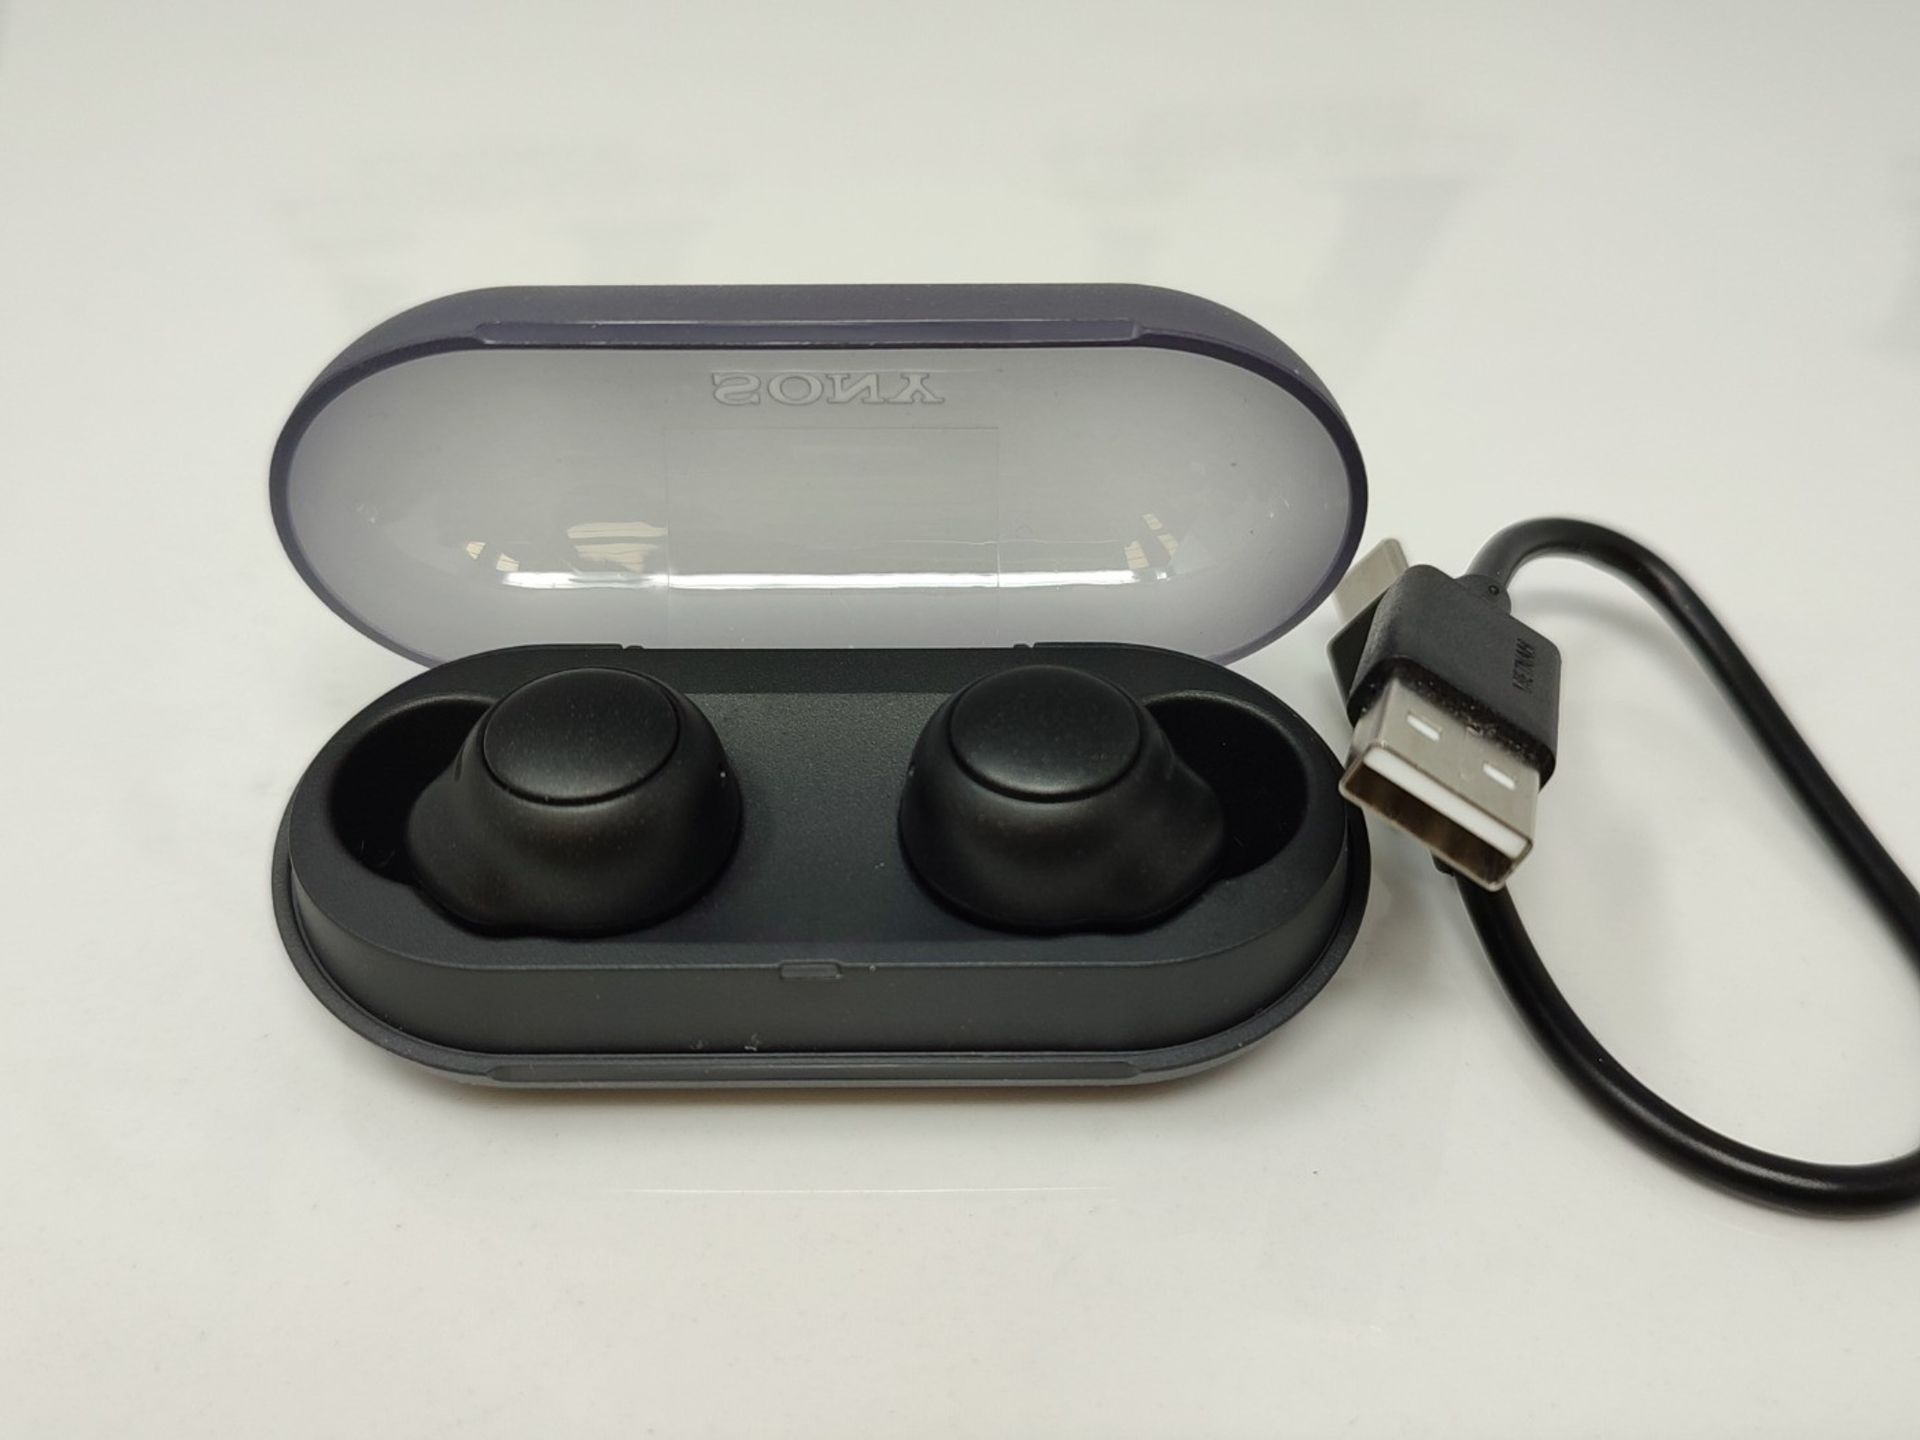 Sony WF-C500 | True Wireless Earphones, Up to 24h Battery Life and Fast Charging, IPX4 - Image 2 of 3